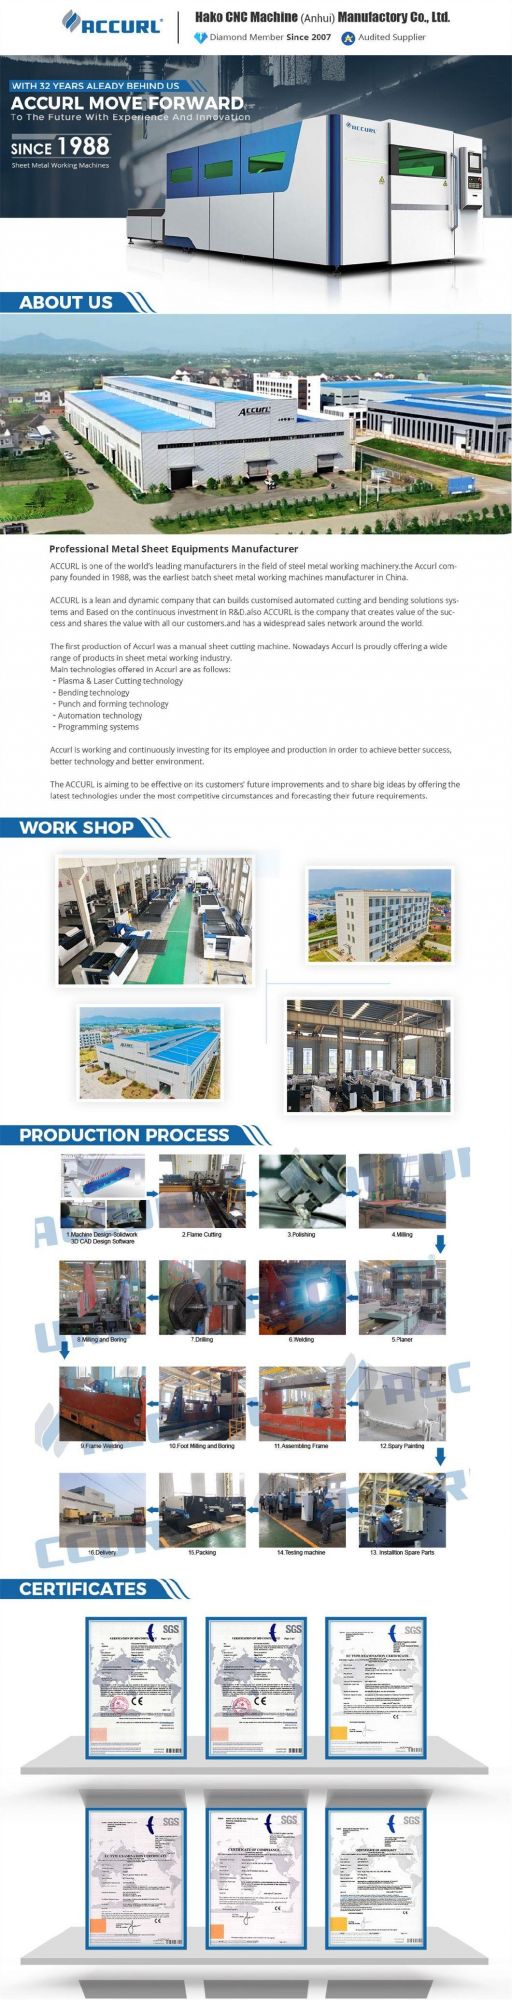 High Quality Products Making Aluminum Pots and Pans of 50tons Four Pillar Stretching Hydraulic Press Machine